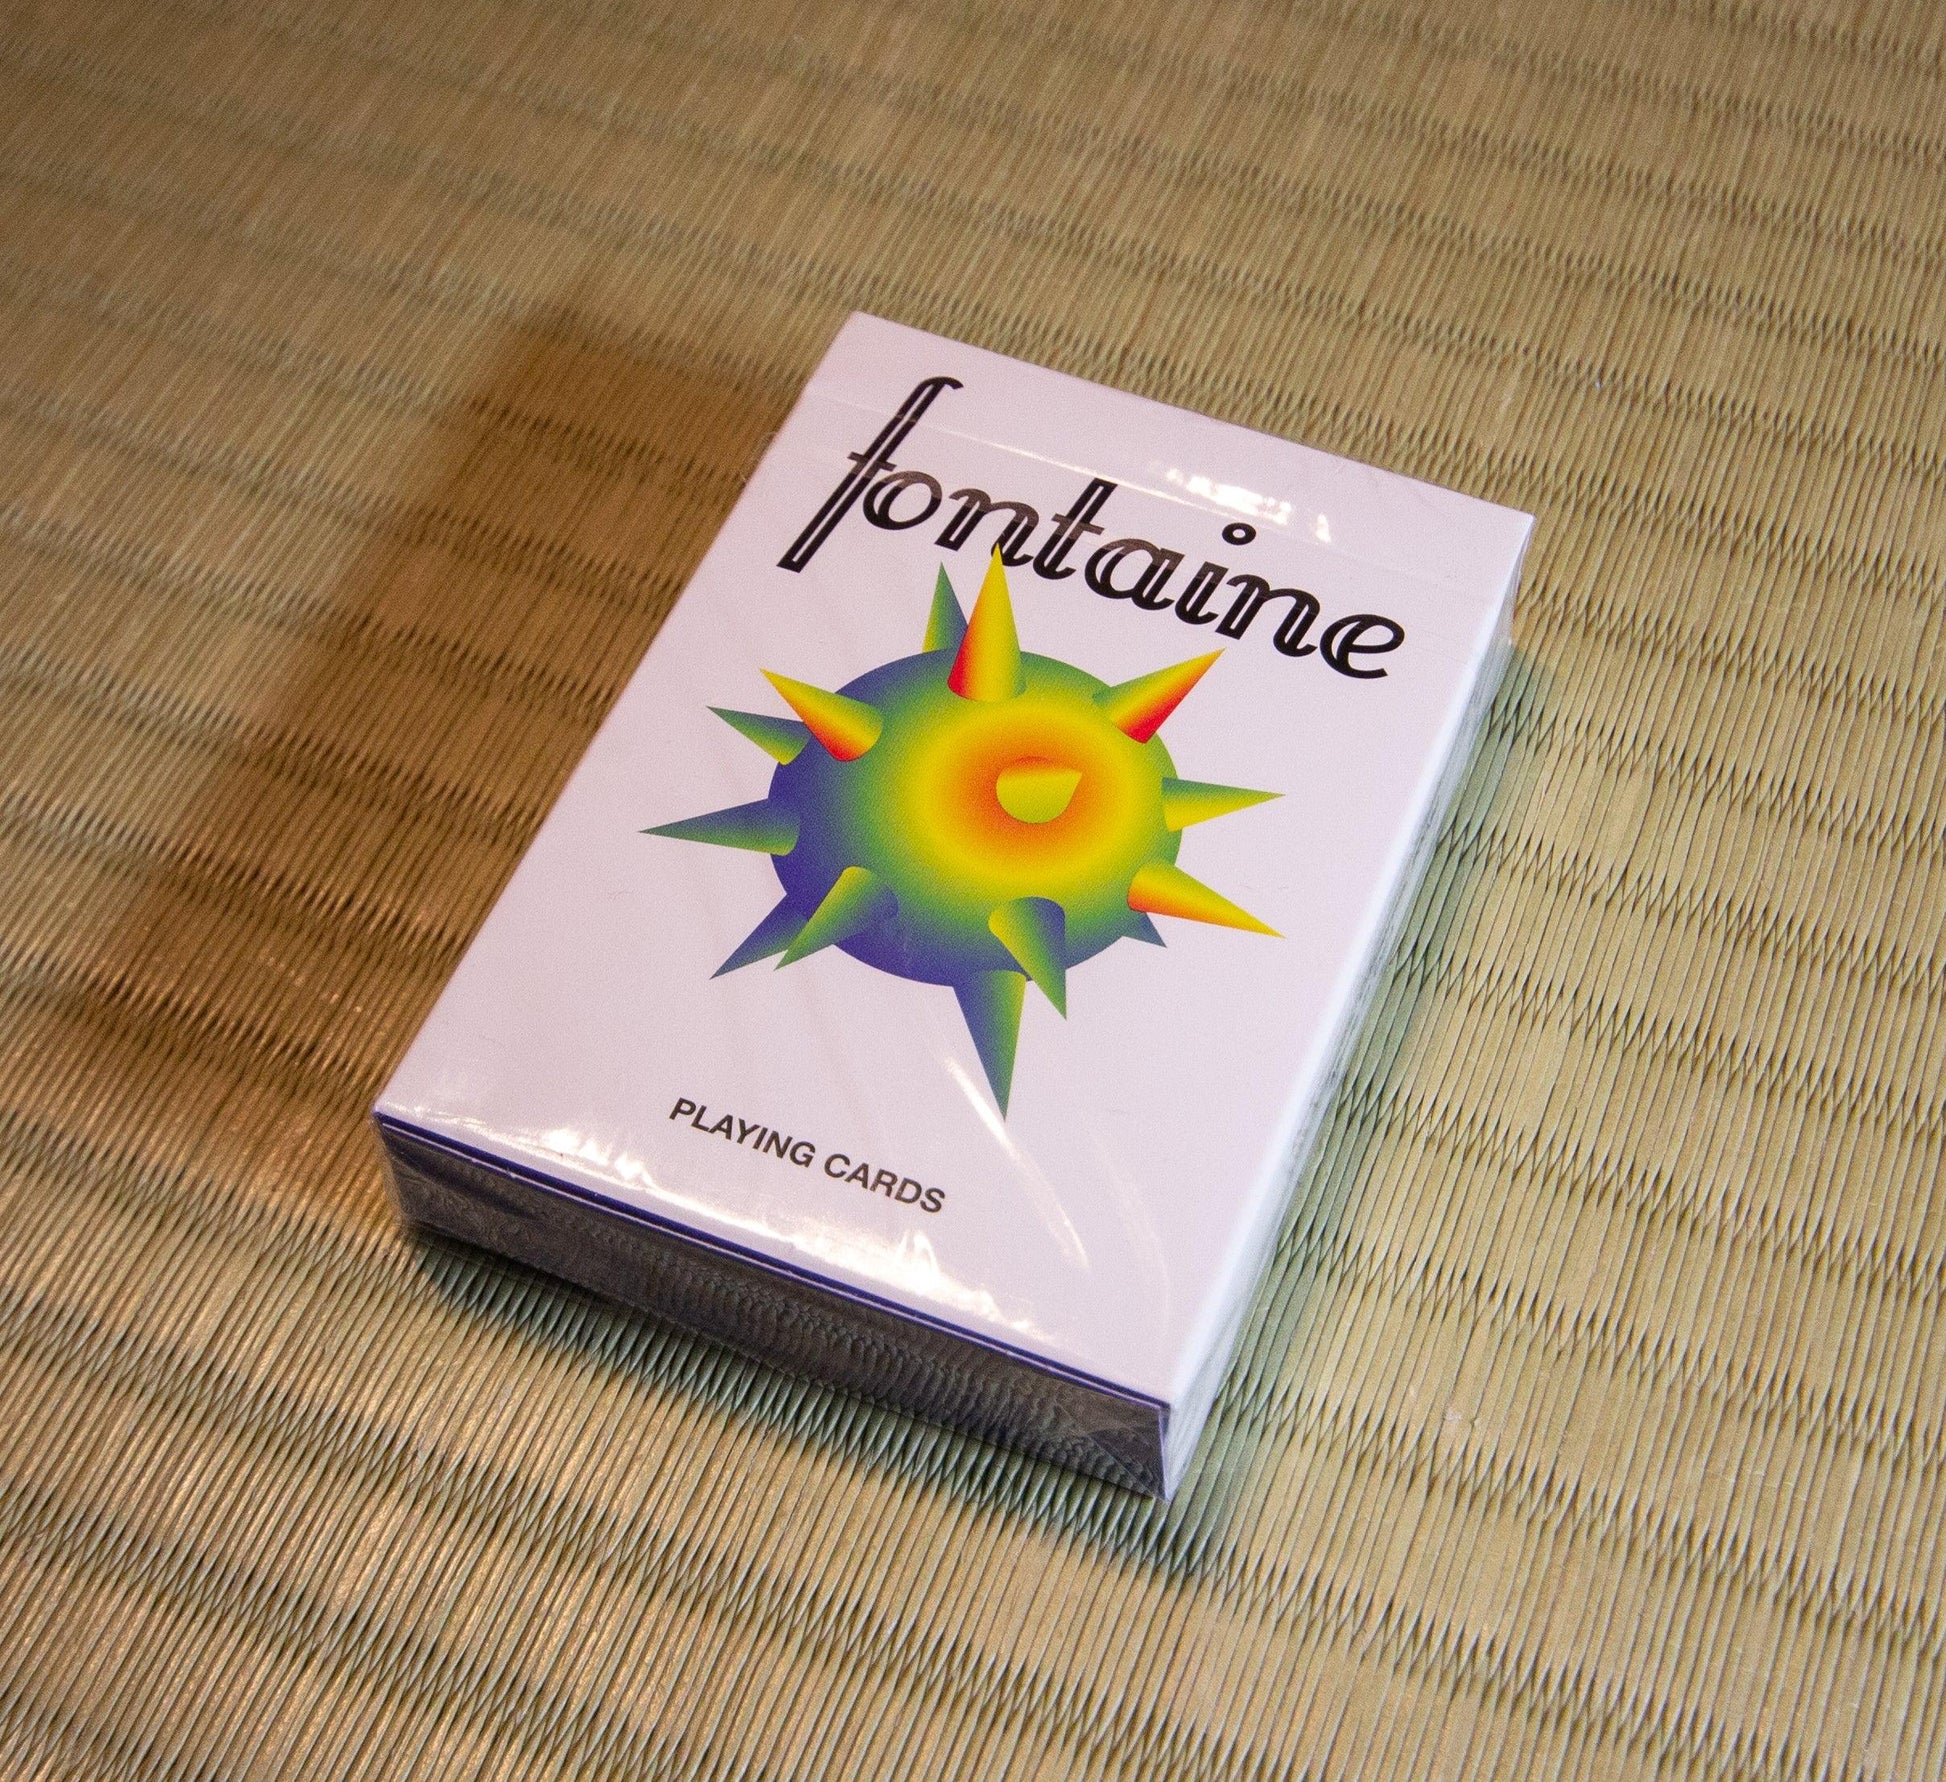 Heat Vision Fontaine Playing Cards by Fontaine Cards - Deckita Decks